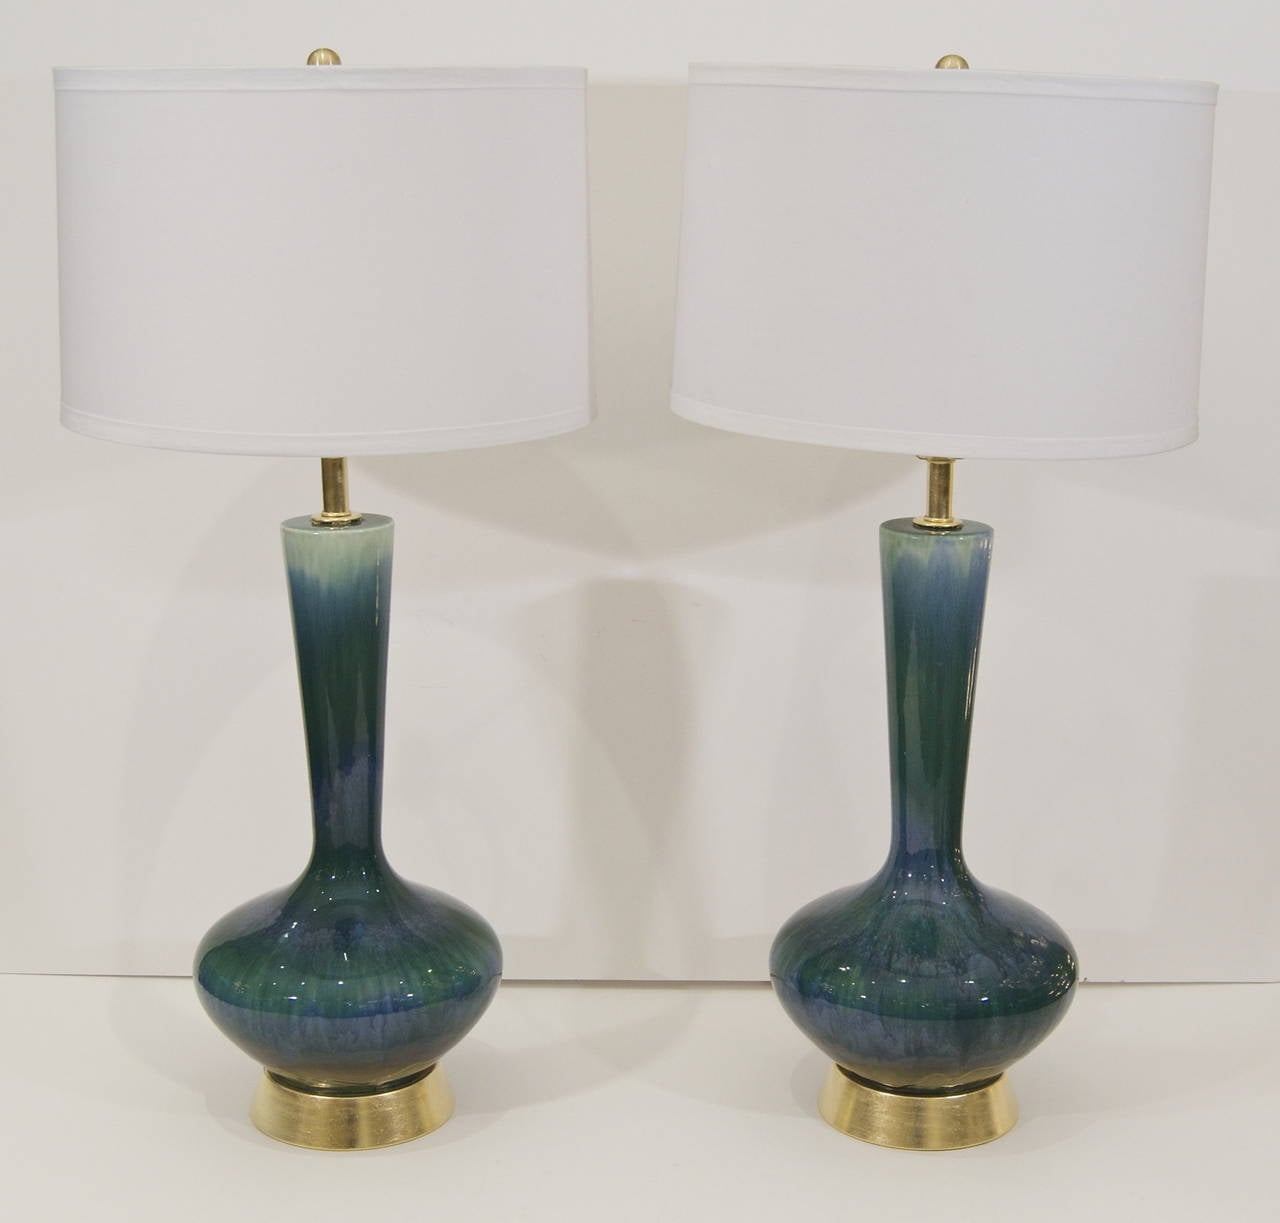 Excellent pair of table lamps similar in style to Royal Haeger, the dramatically proportioned body surmounting a hand gilt base.

Three way socket up to 150 watts, new wiring and socket.

Lampshades shown are for demonstration purposes only and